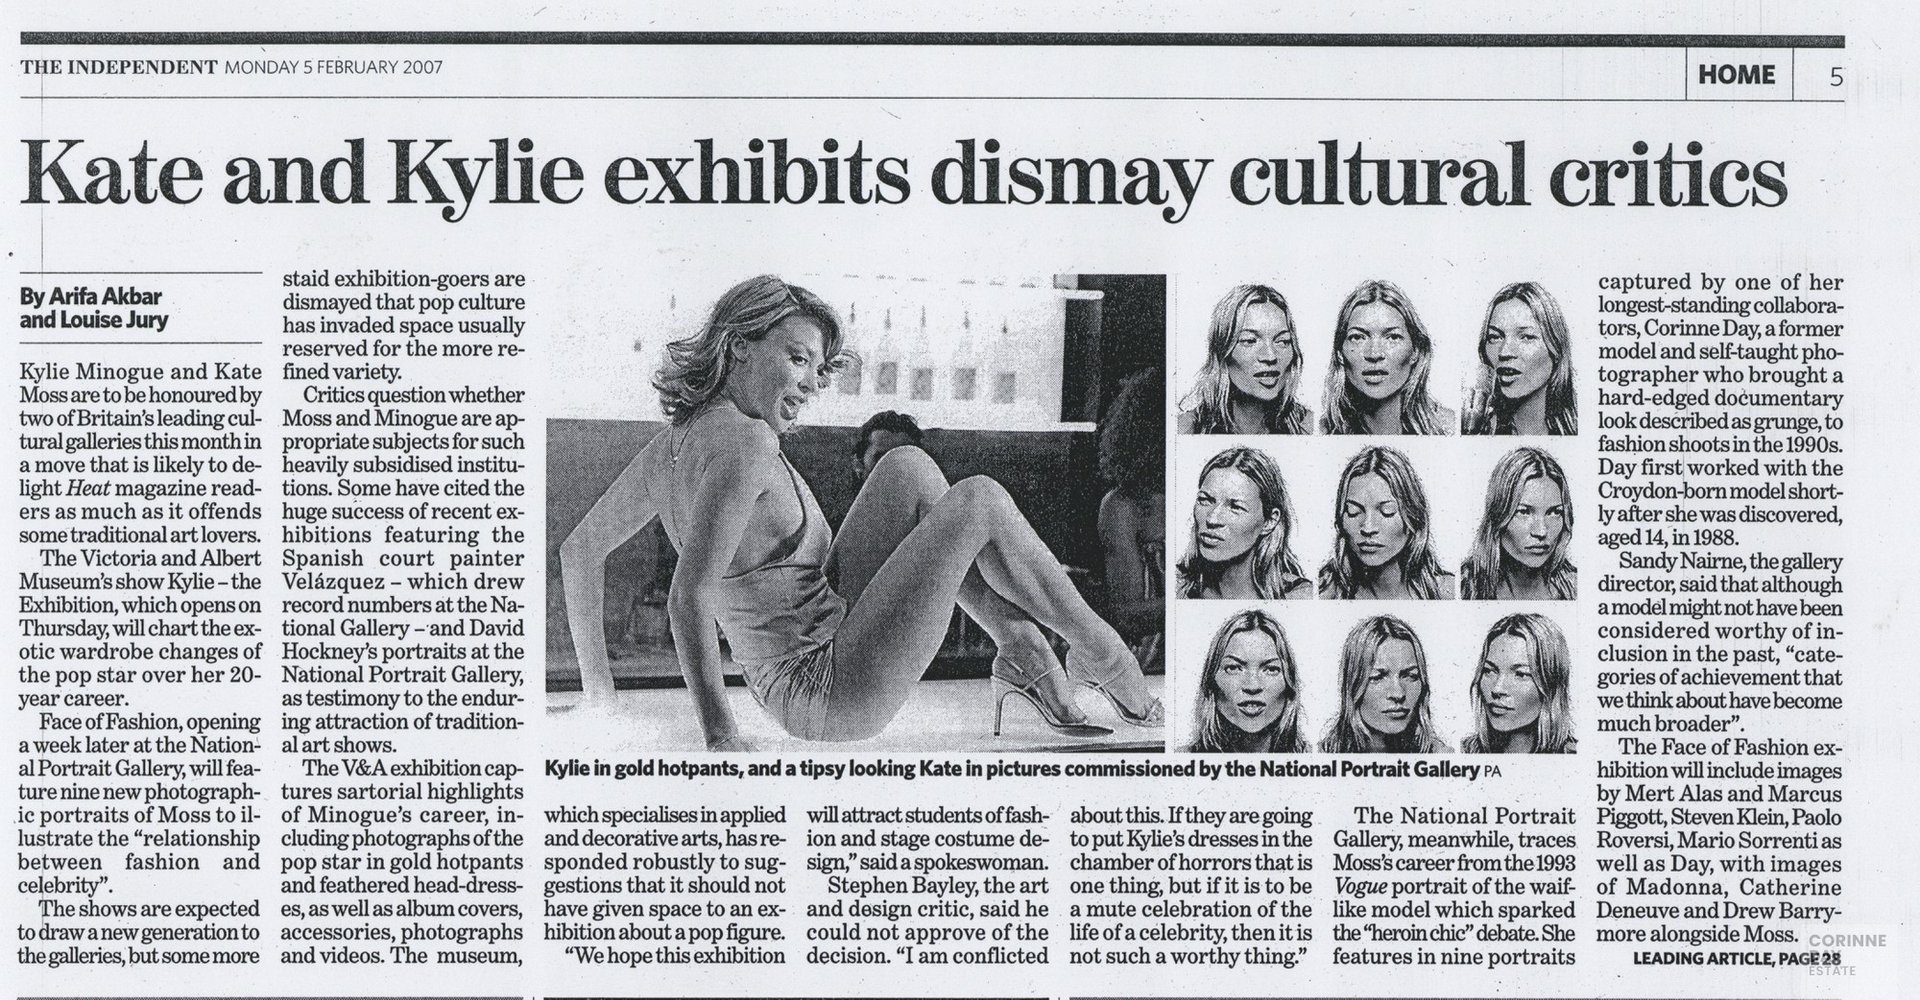 Kate and Kylie exhibits dismay cultural critics, The Independent, 5 Feb 2007 — Image 1 of 1